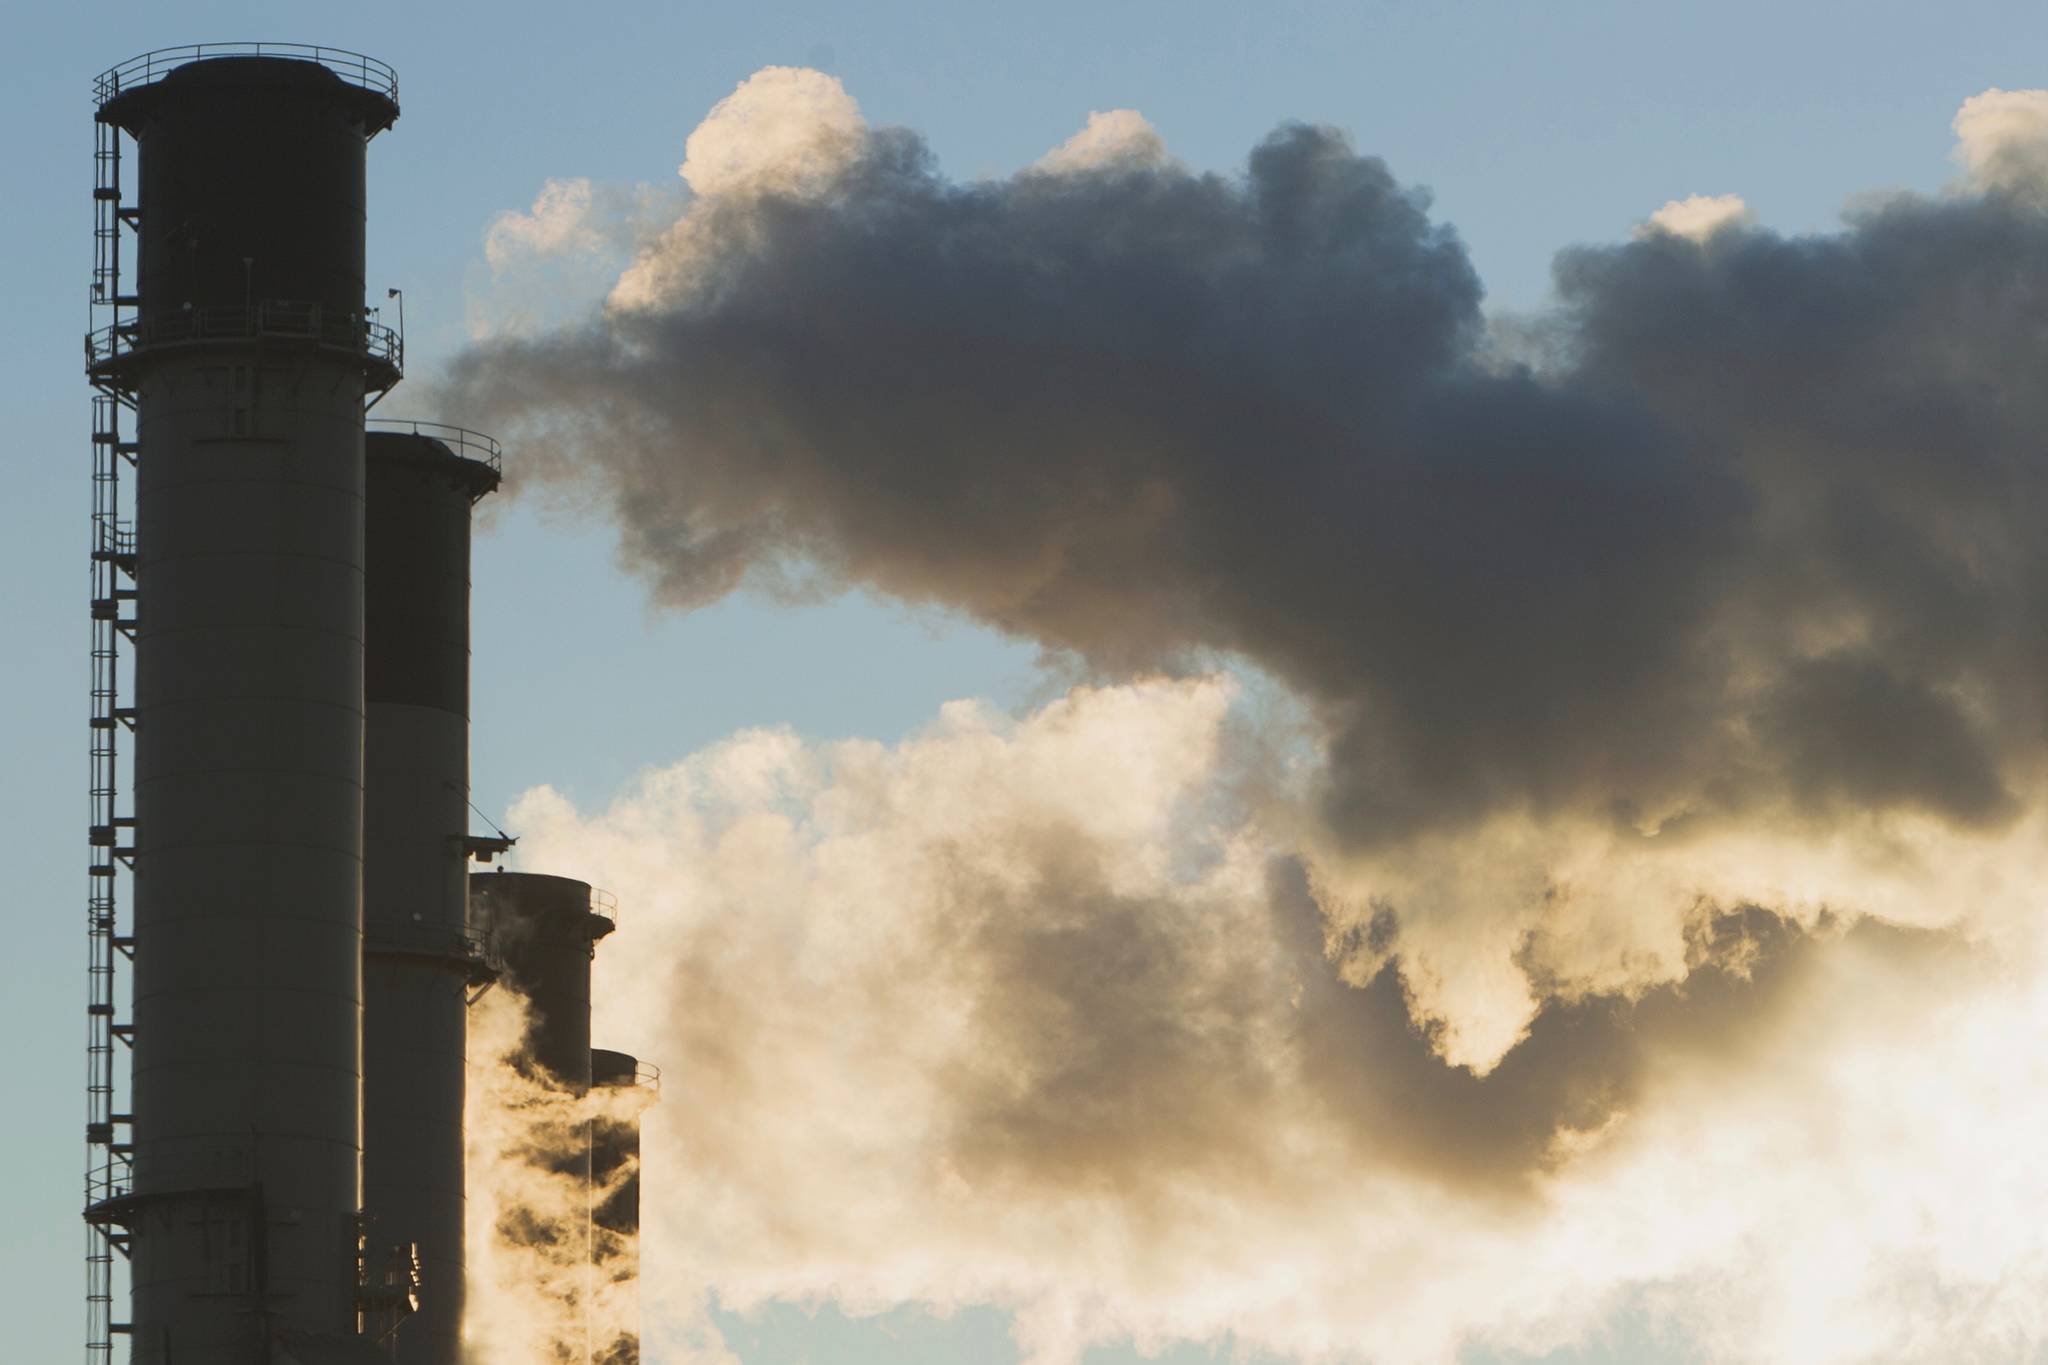 Carbon fee hurts business and families | Brunell